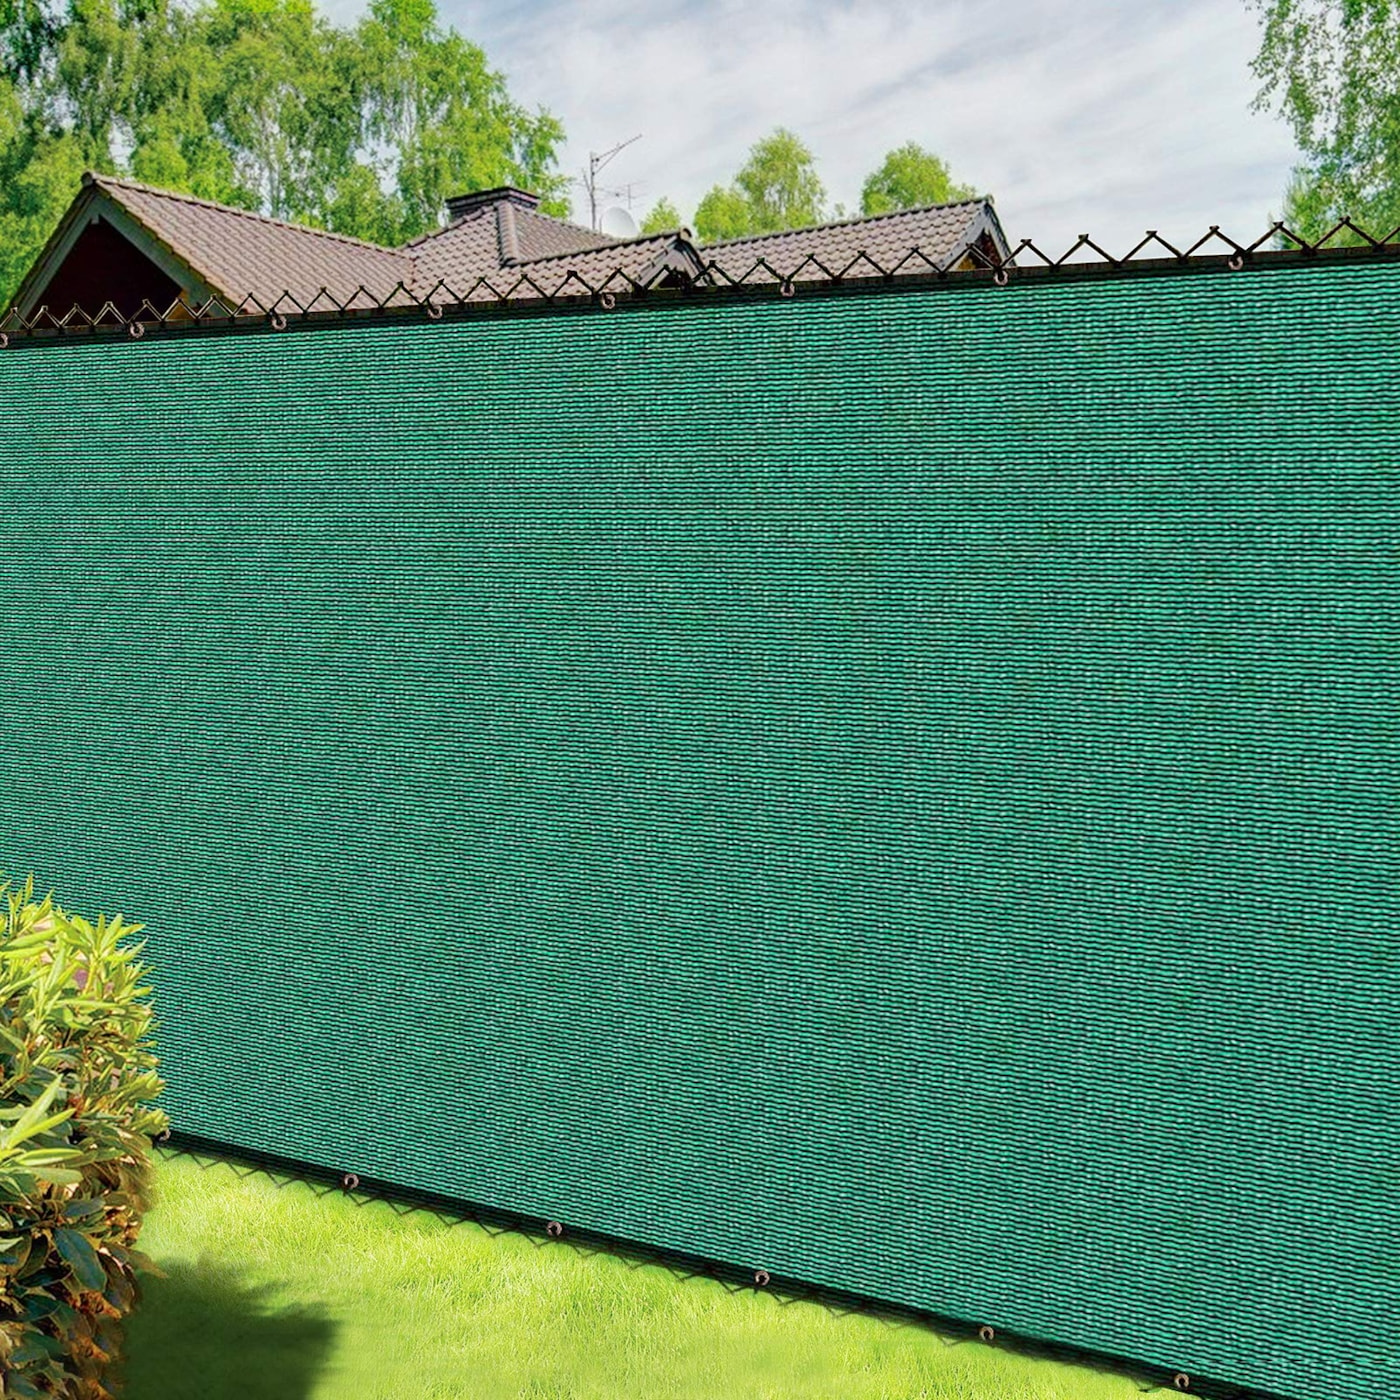 VIVOSUN 4' x 50' Green Fence Privacy Screen Heavy Duty Fencing Mesh Shade Net with Bindings and Grommets for Outdoor Yard Wall Garden Backyard